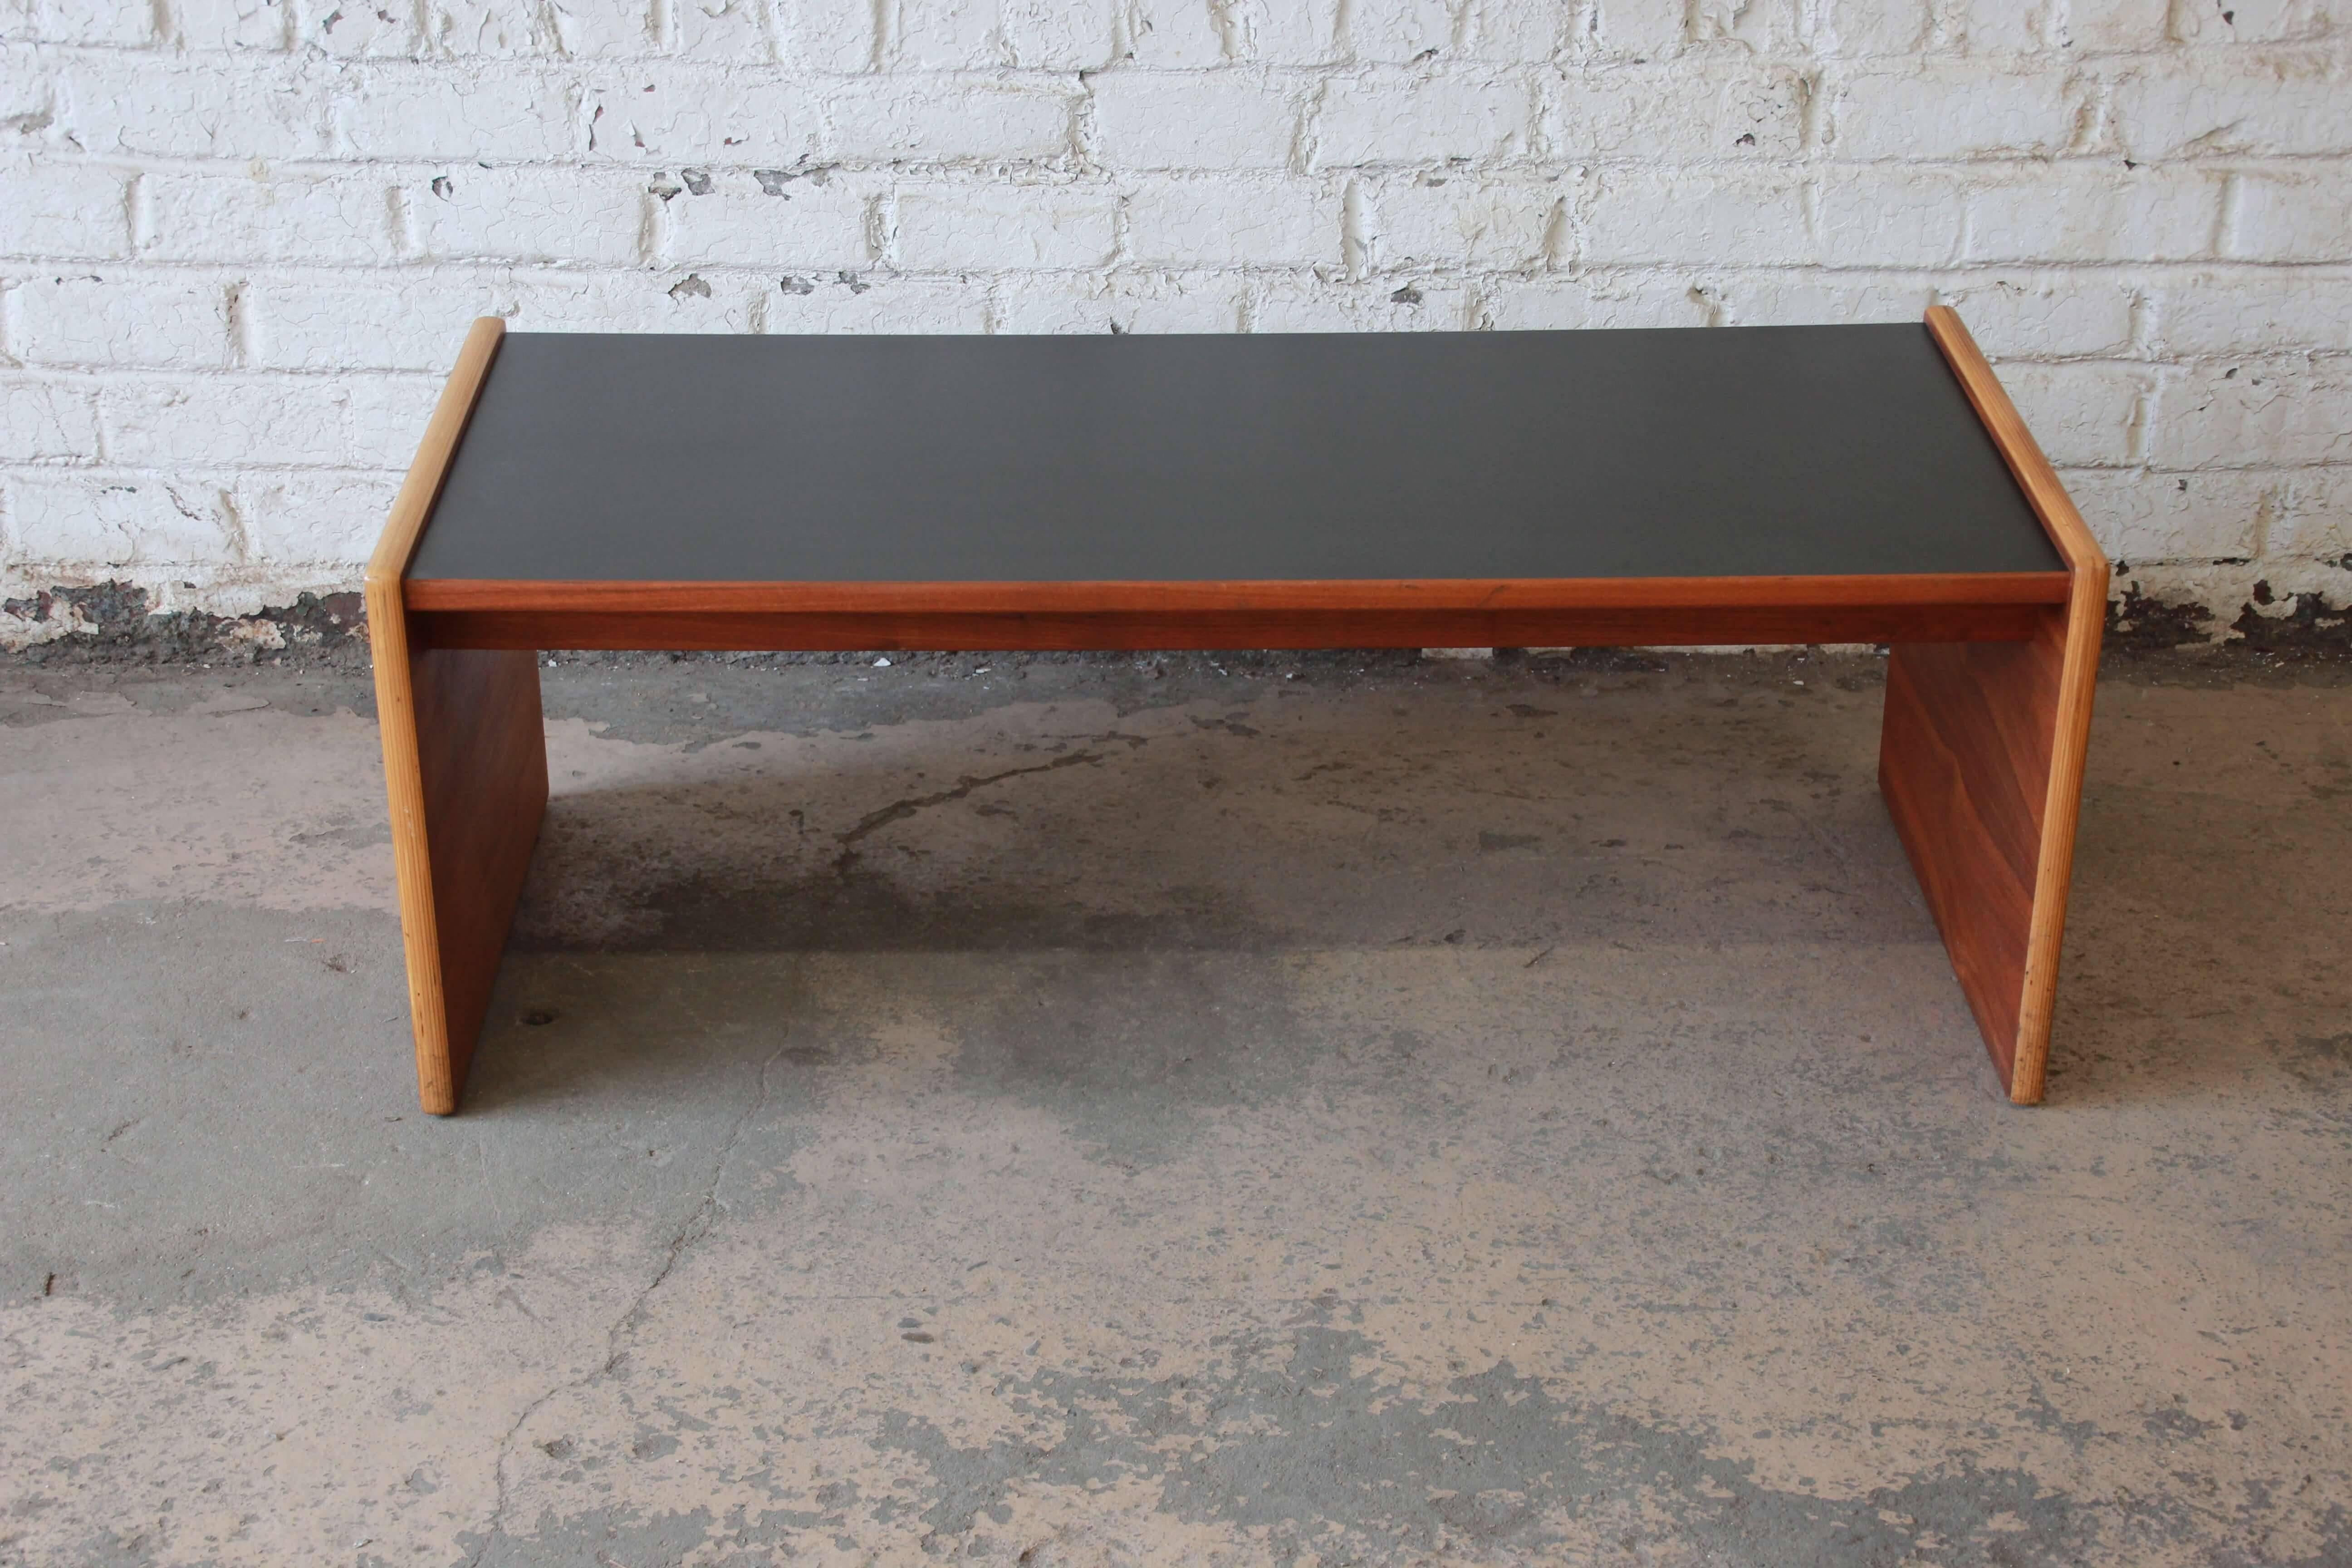 Offering a very nice and stylish Mid-Century Modern coffee table or bench by Jens Risom. The bench features a beautiful walnut wood grain on the legs that connect to a durable black laminate top. The table is in great vintage condition and is solid